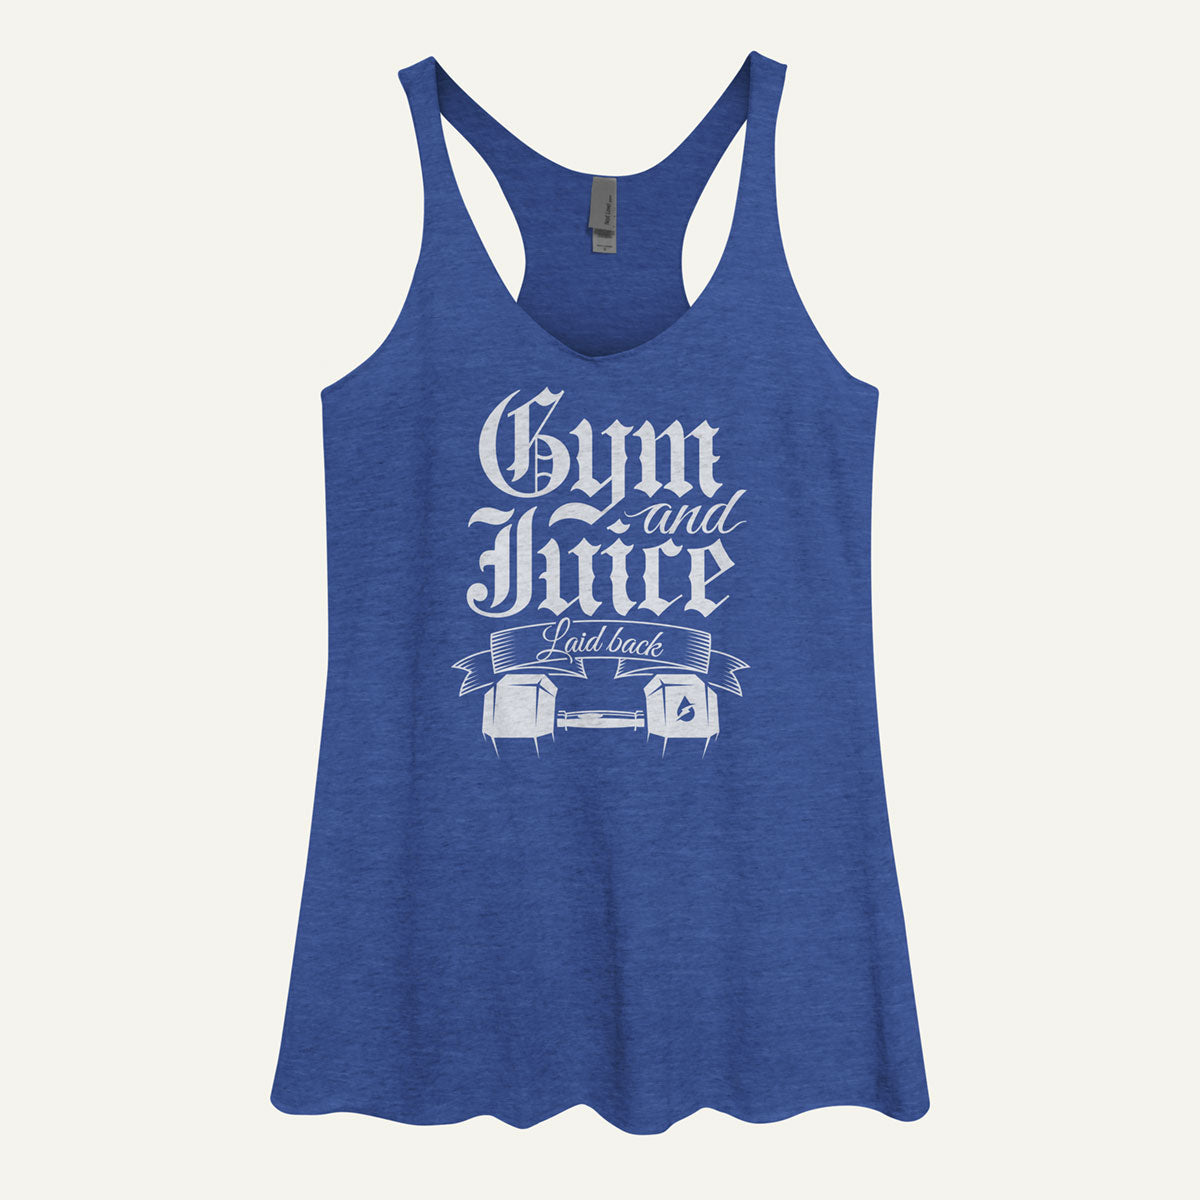 Gym And Juice Women's Tank Top